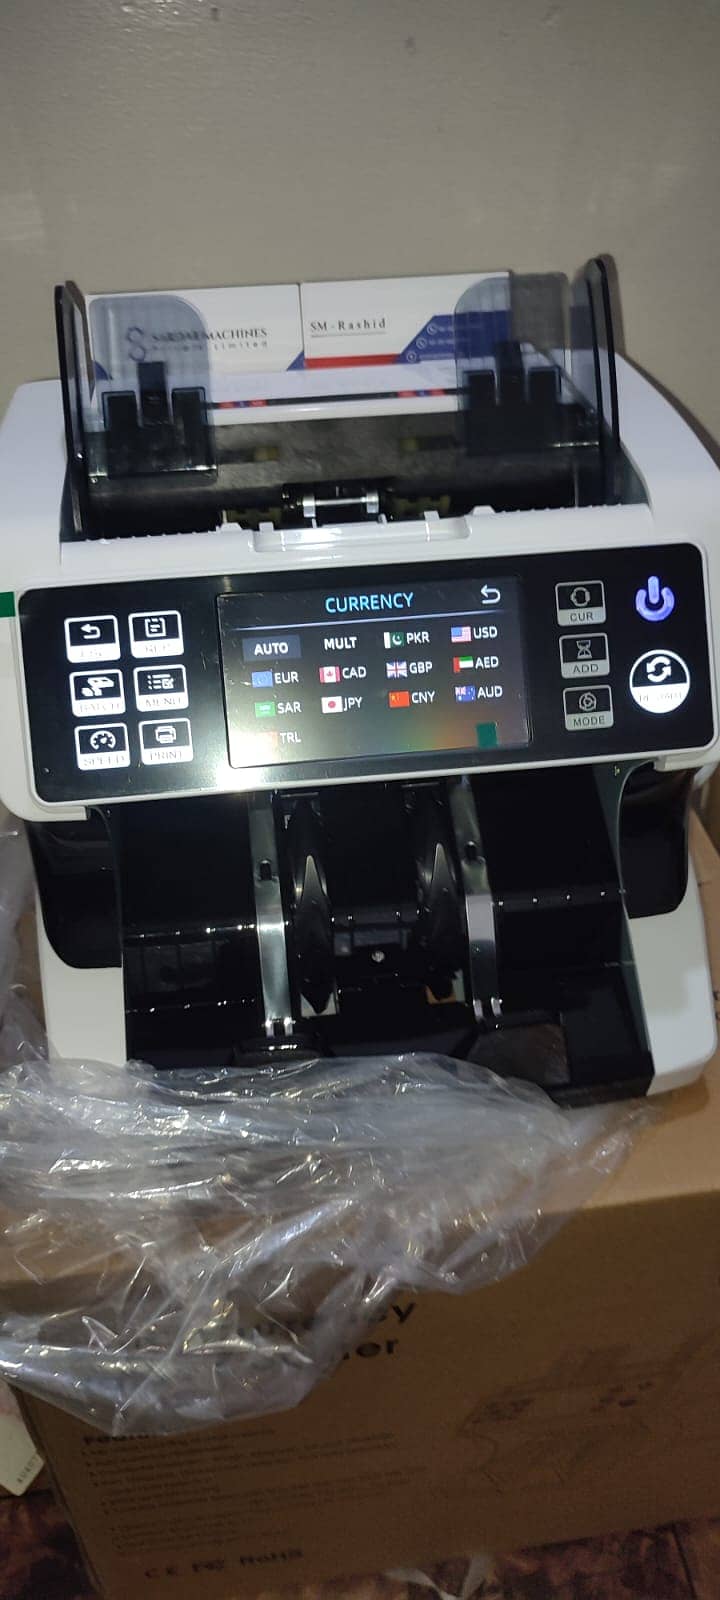 Cash currency note counting machine in Pakistan with fake note detecti 18